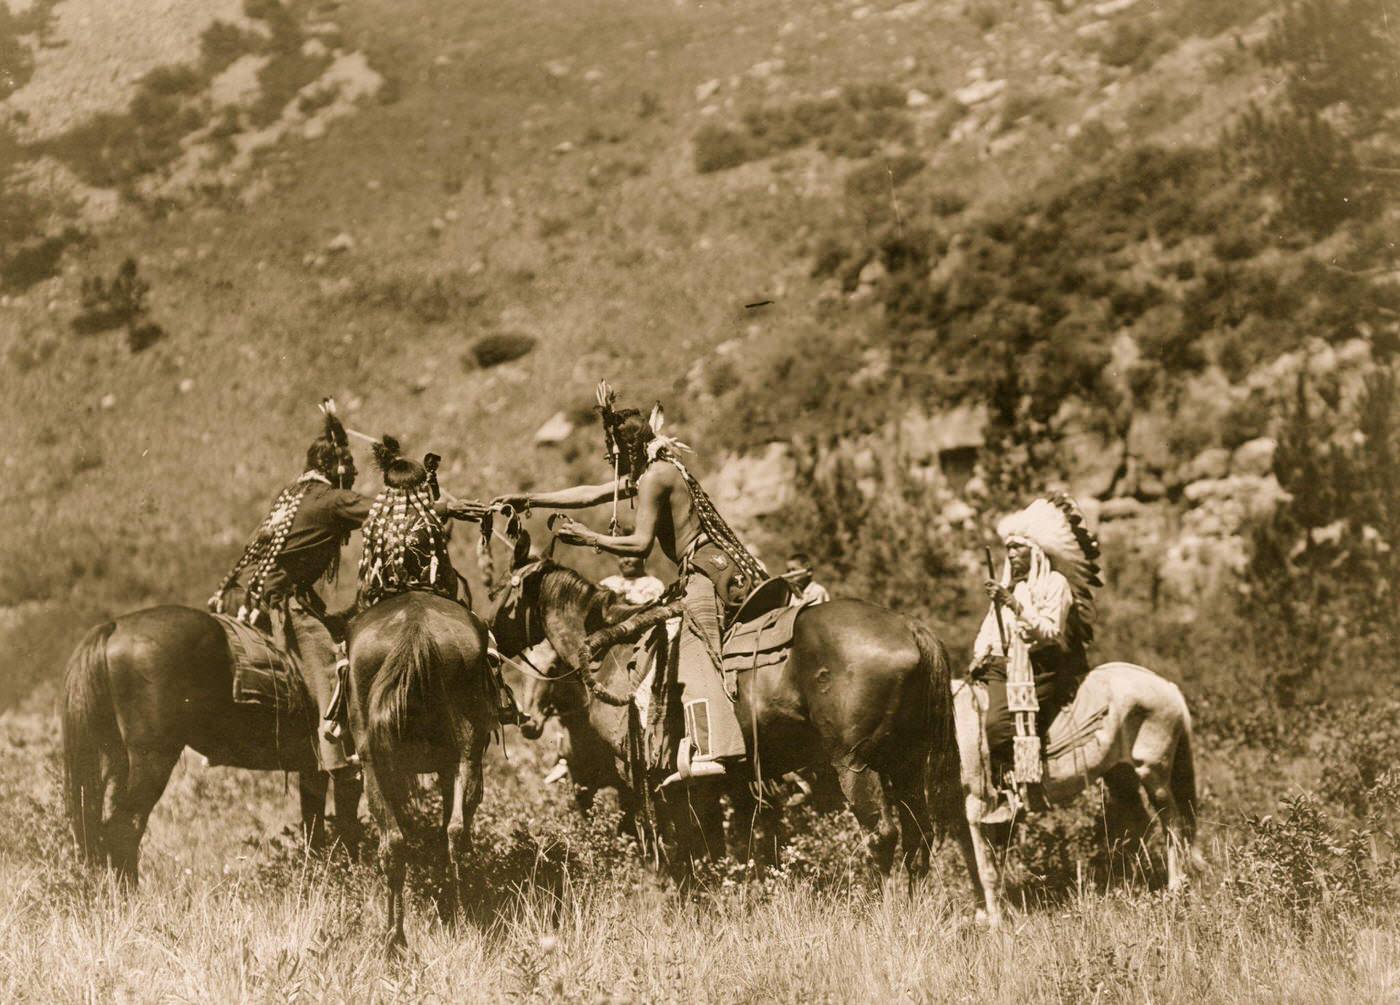 Crow men on horseback apparently involved in an exchange, 1905